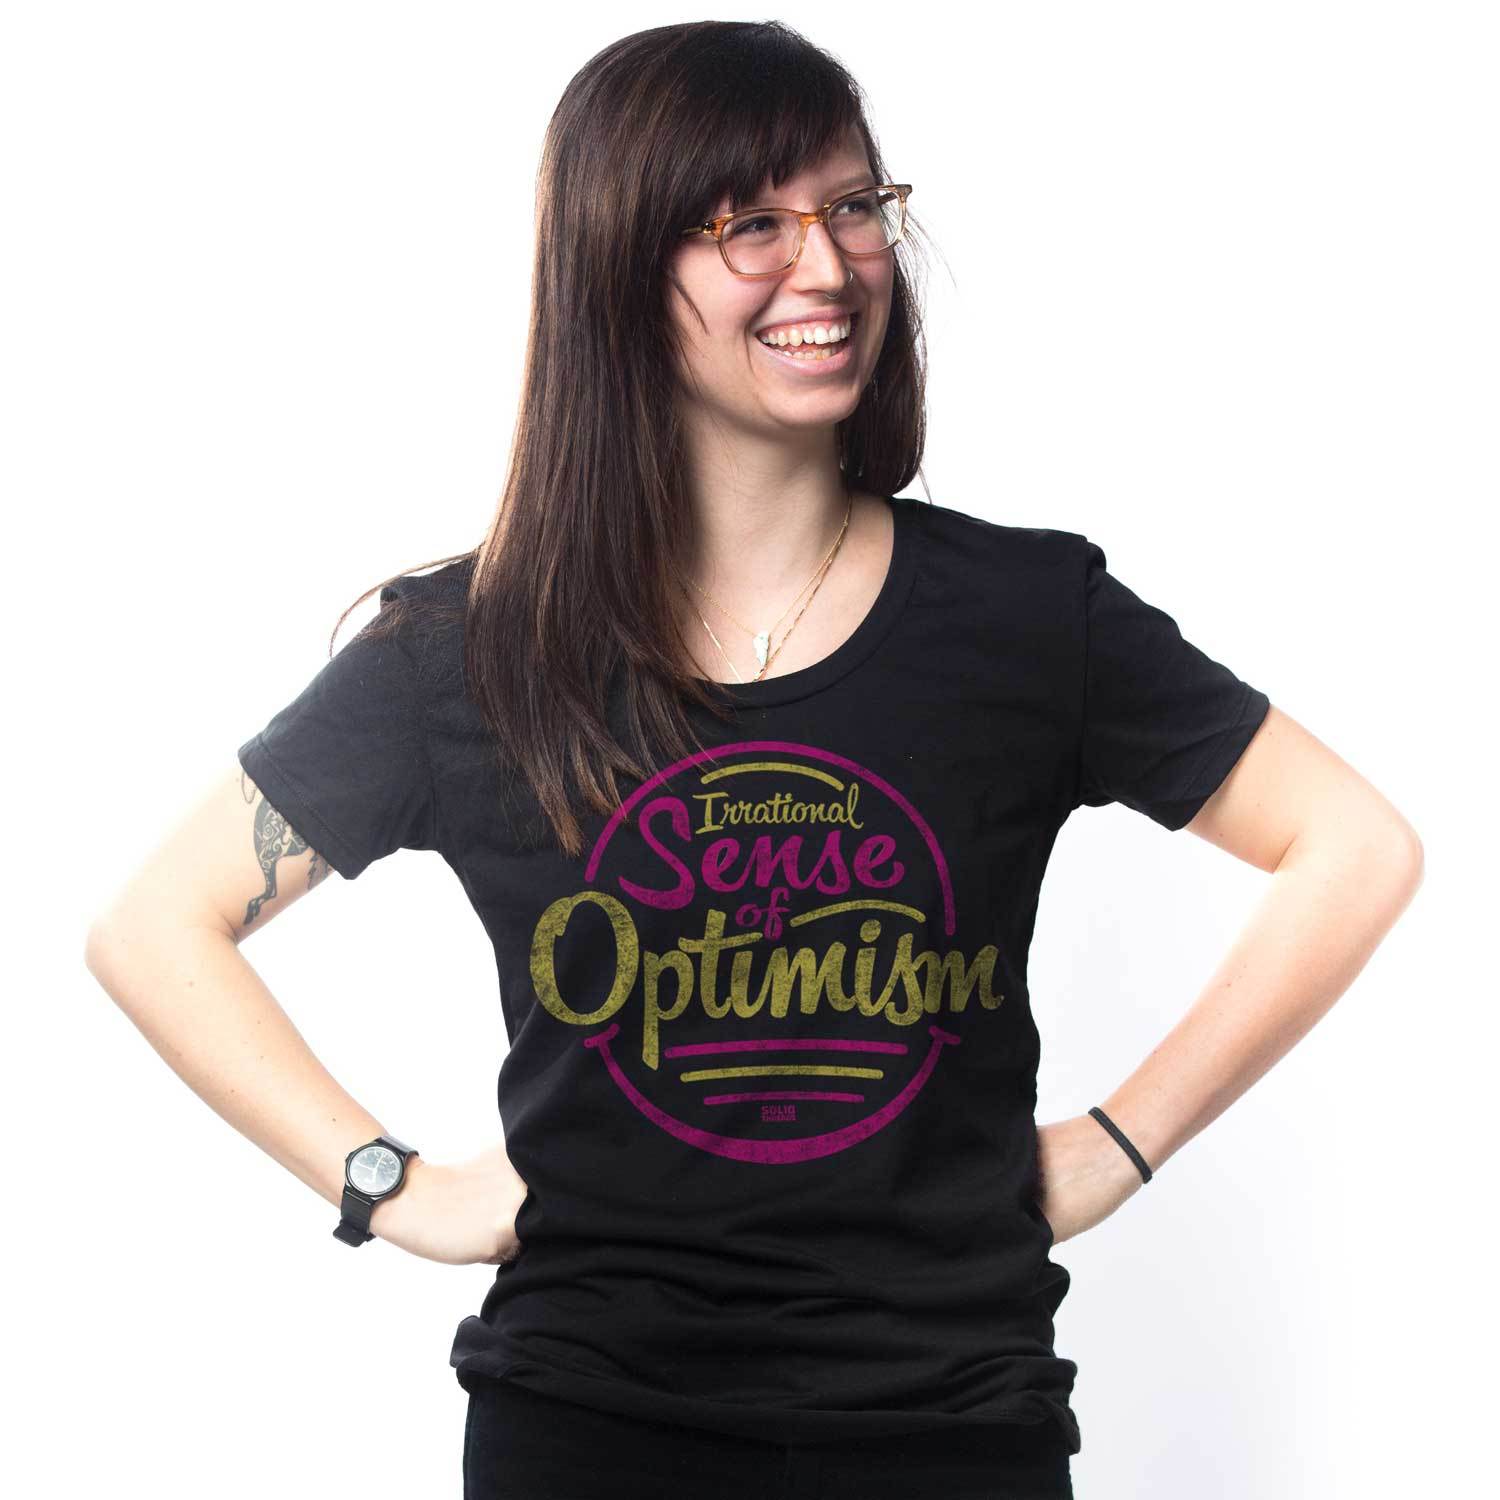 WomenÕs Irrational Sense of Optimism Vintage Inspired Scoopneck Tee-shirt with Retro Positivity Graphic | Solid Threads